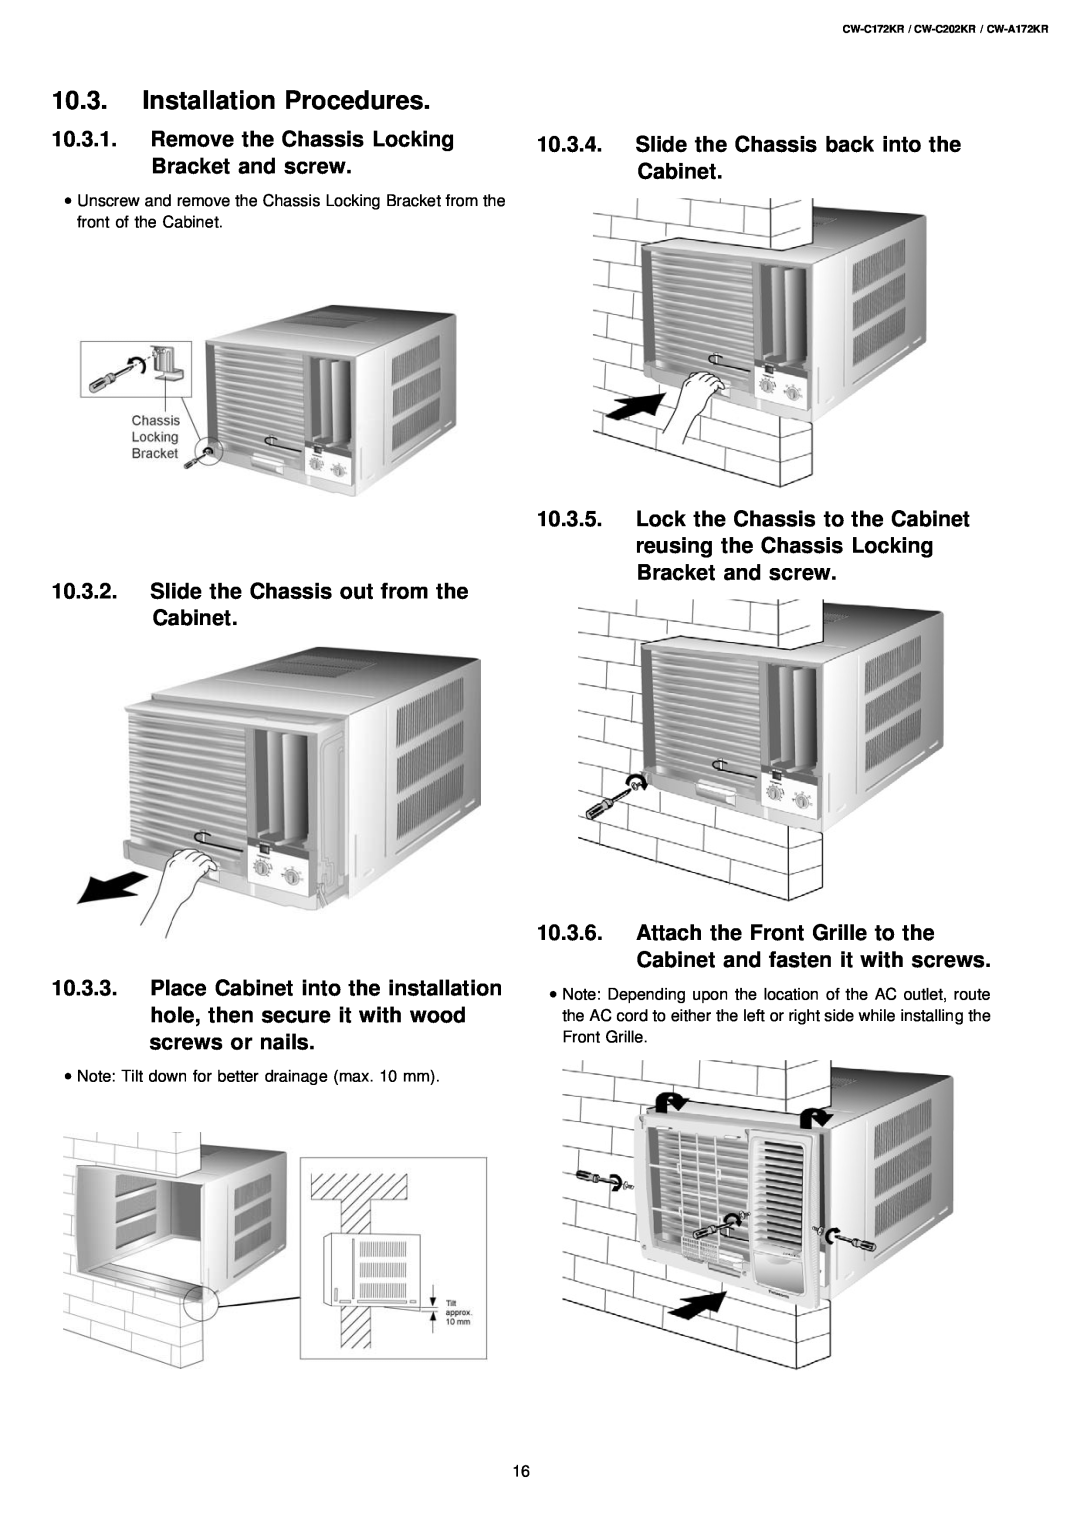 Panasonic CW-C172KR, CW-C202KR operating instructions Installation Procedures, Slide the Chassis out from the Cabinet 